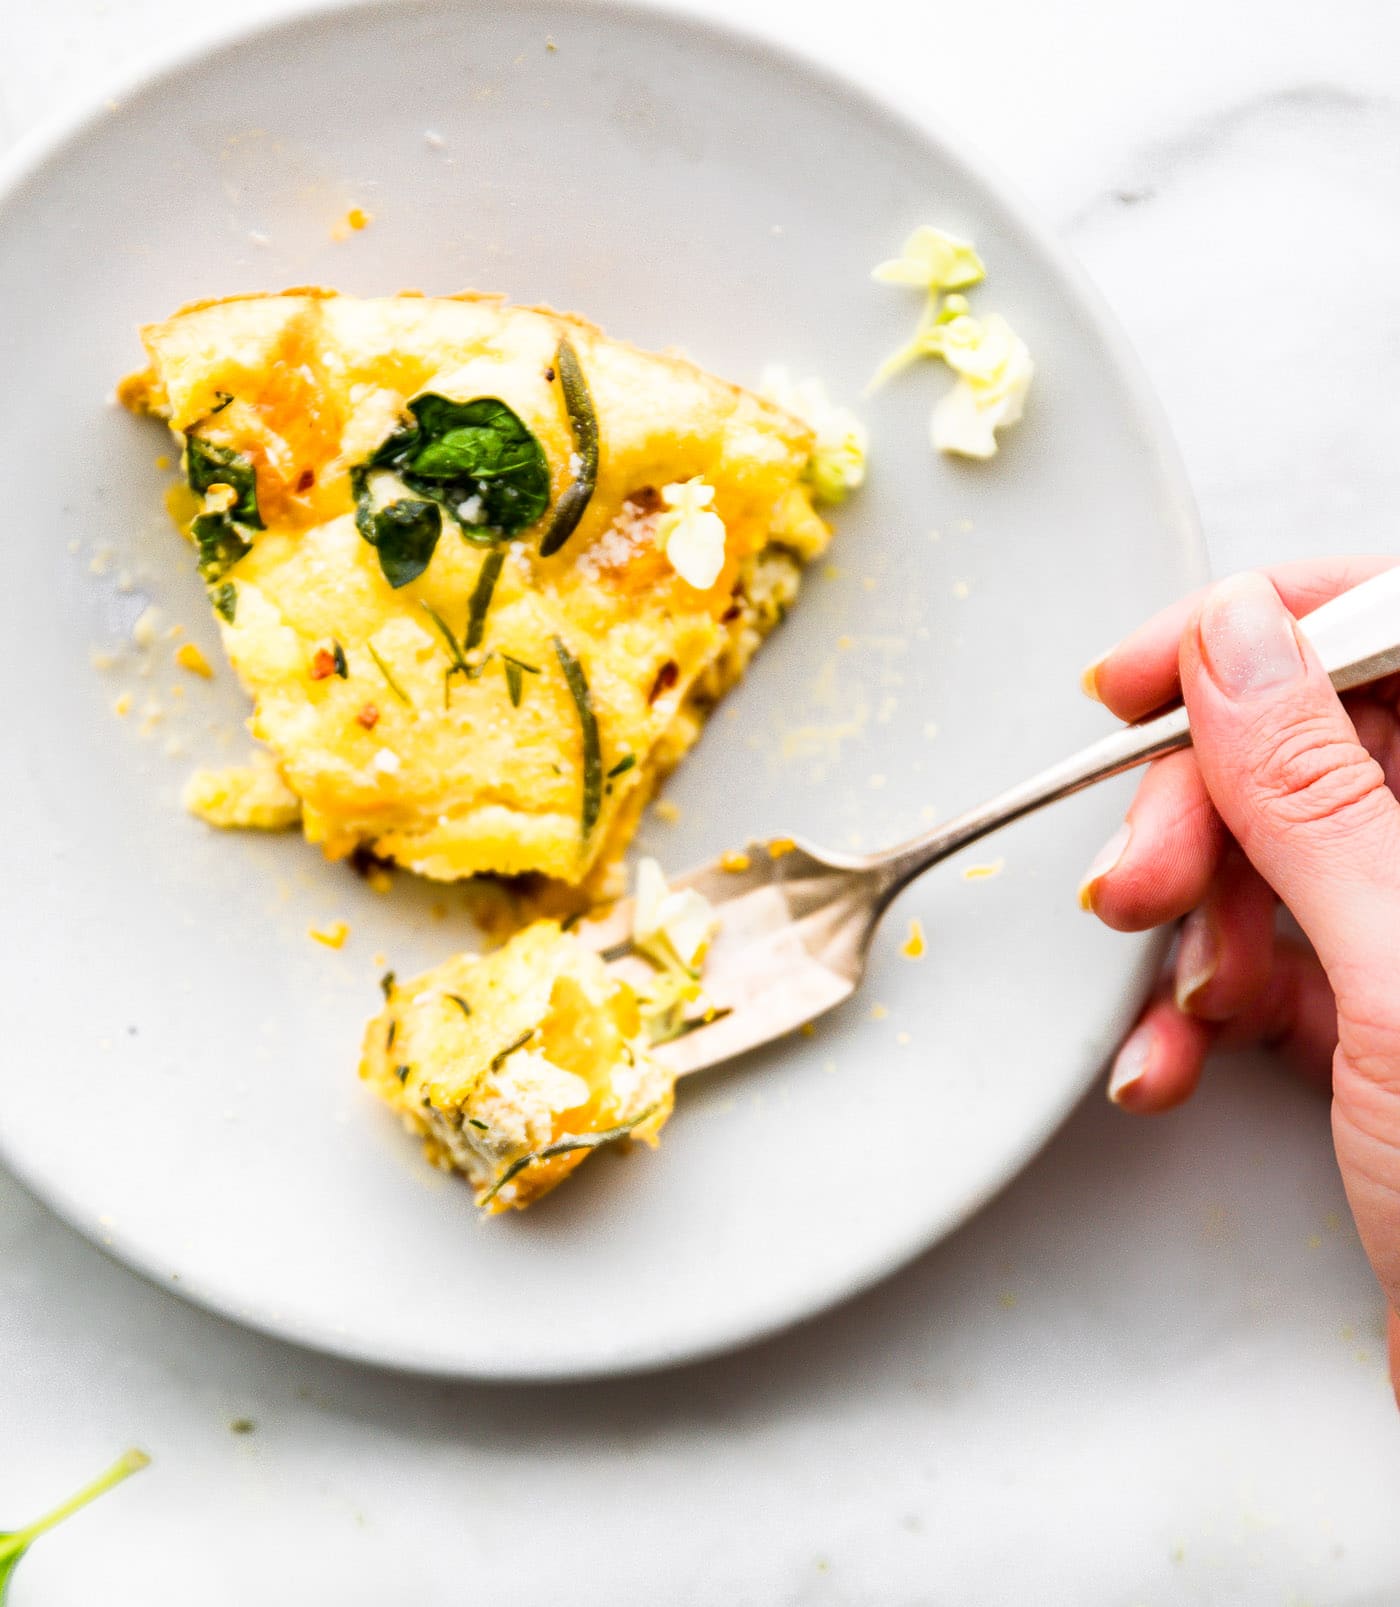 A fork full of pumpkin frittata from a slice of frittata on a white plate.